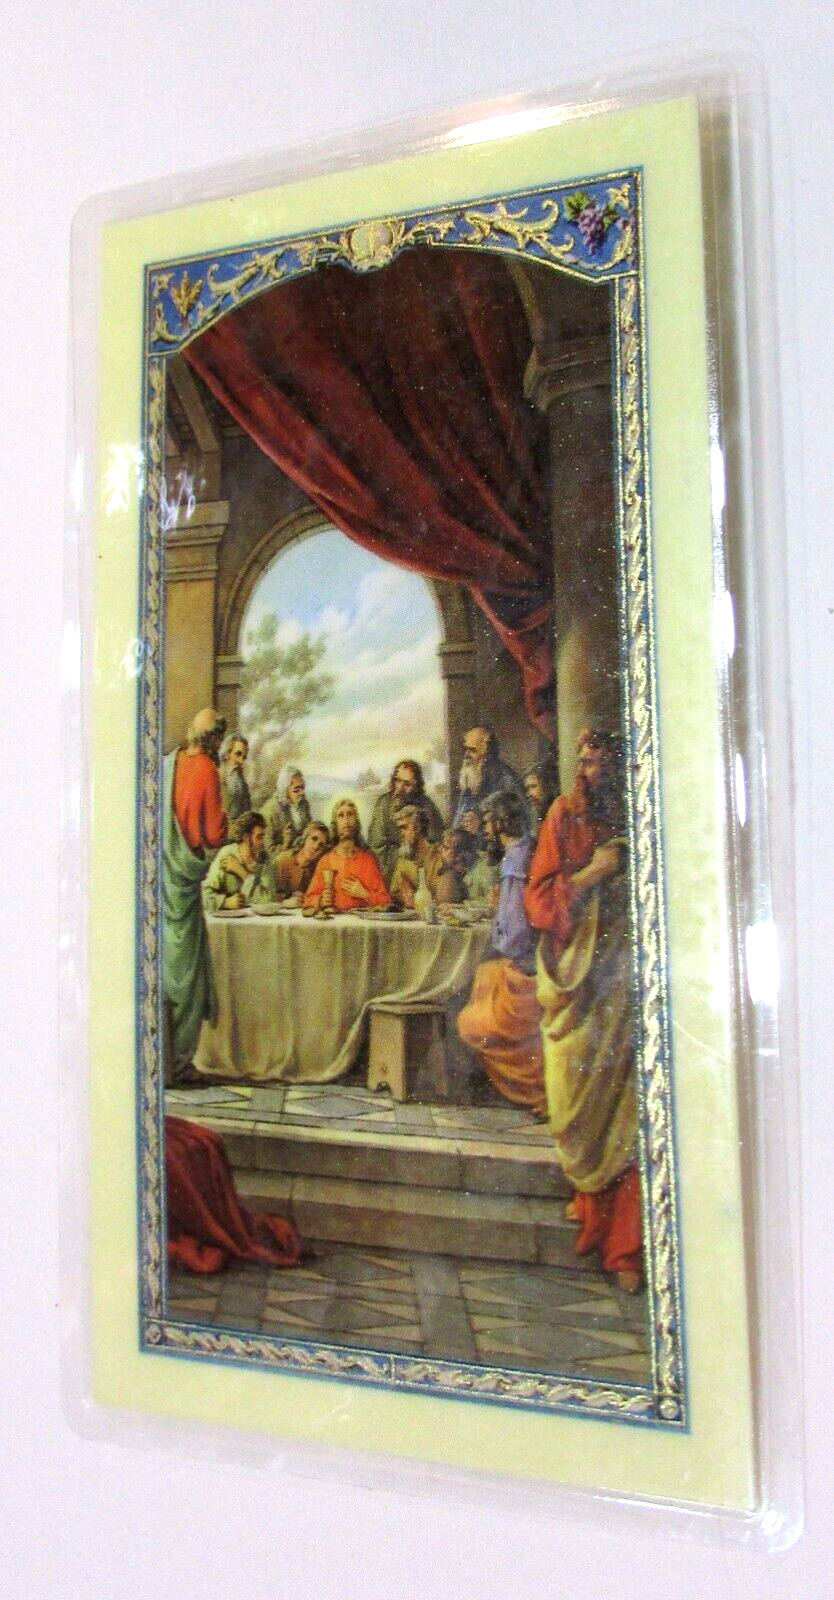 Excellent Vintage Apostles’ Creed 3x4 Laminated Holy Card Printed in Italy